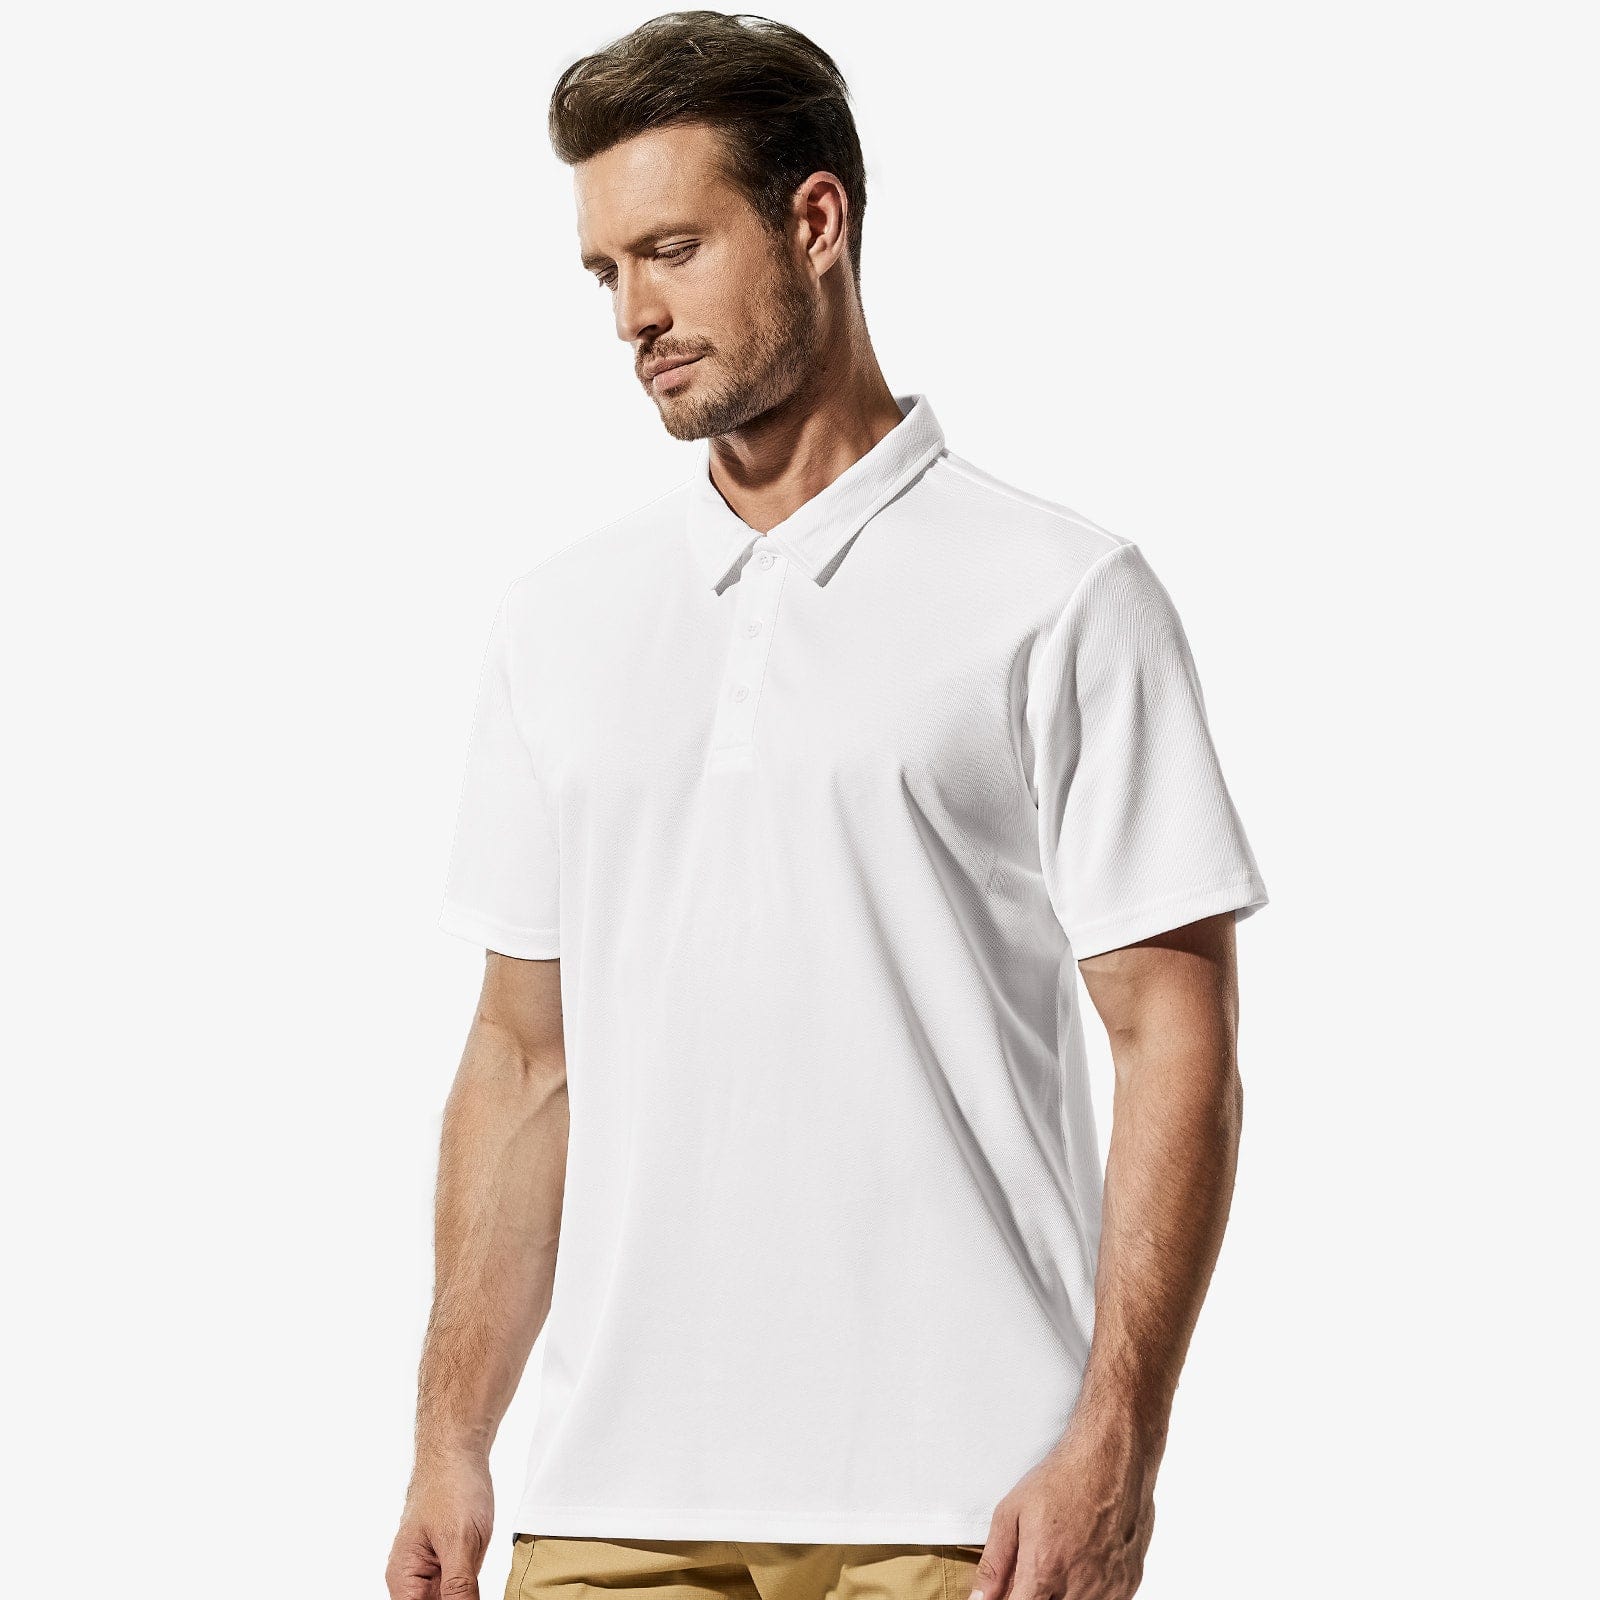 Collared Quick Men MIER Casual Polo Shirts Dry Shirts